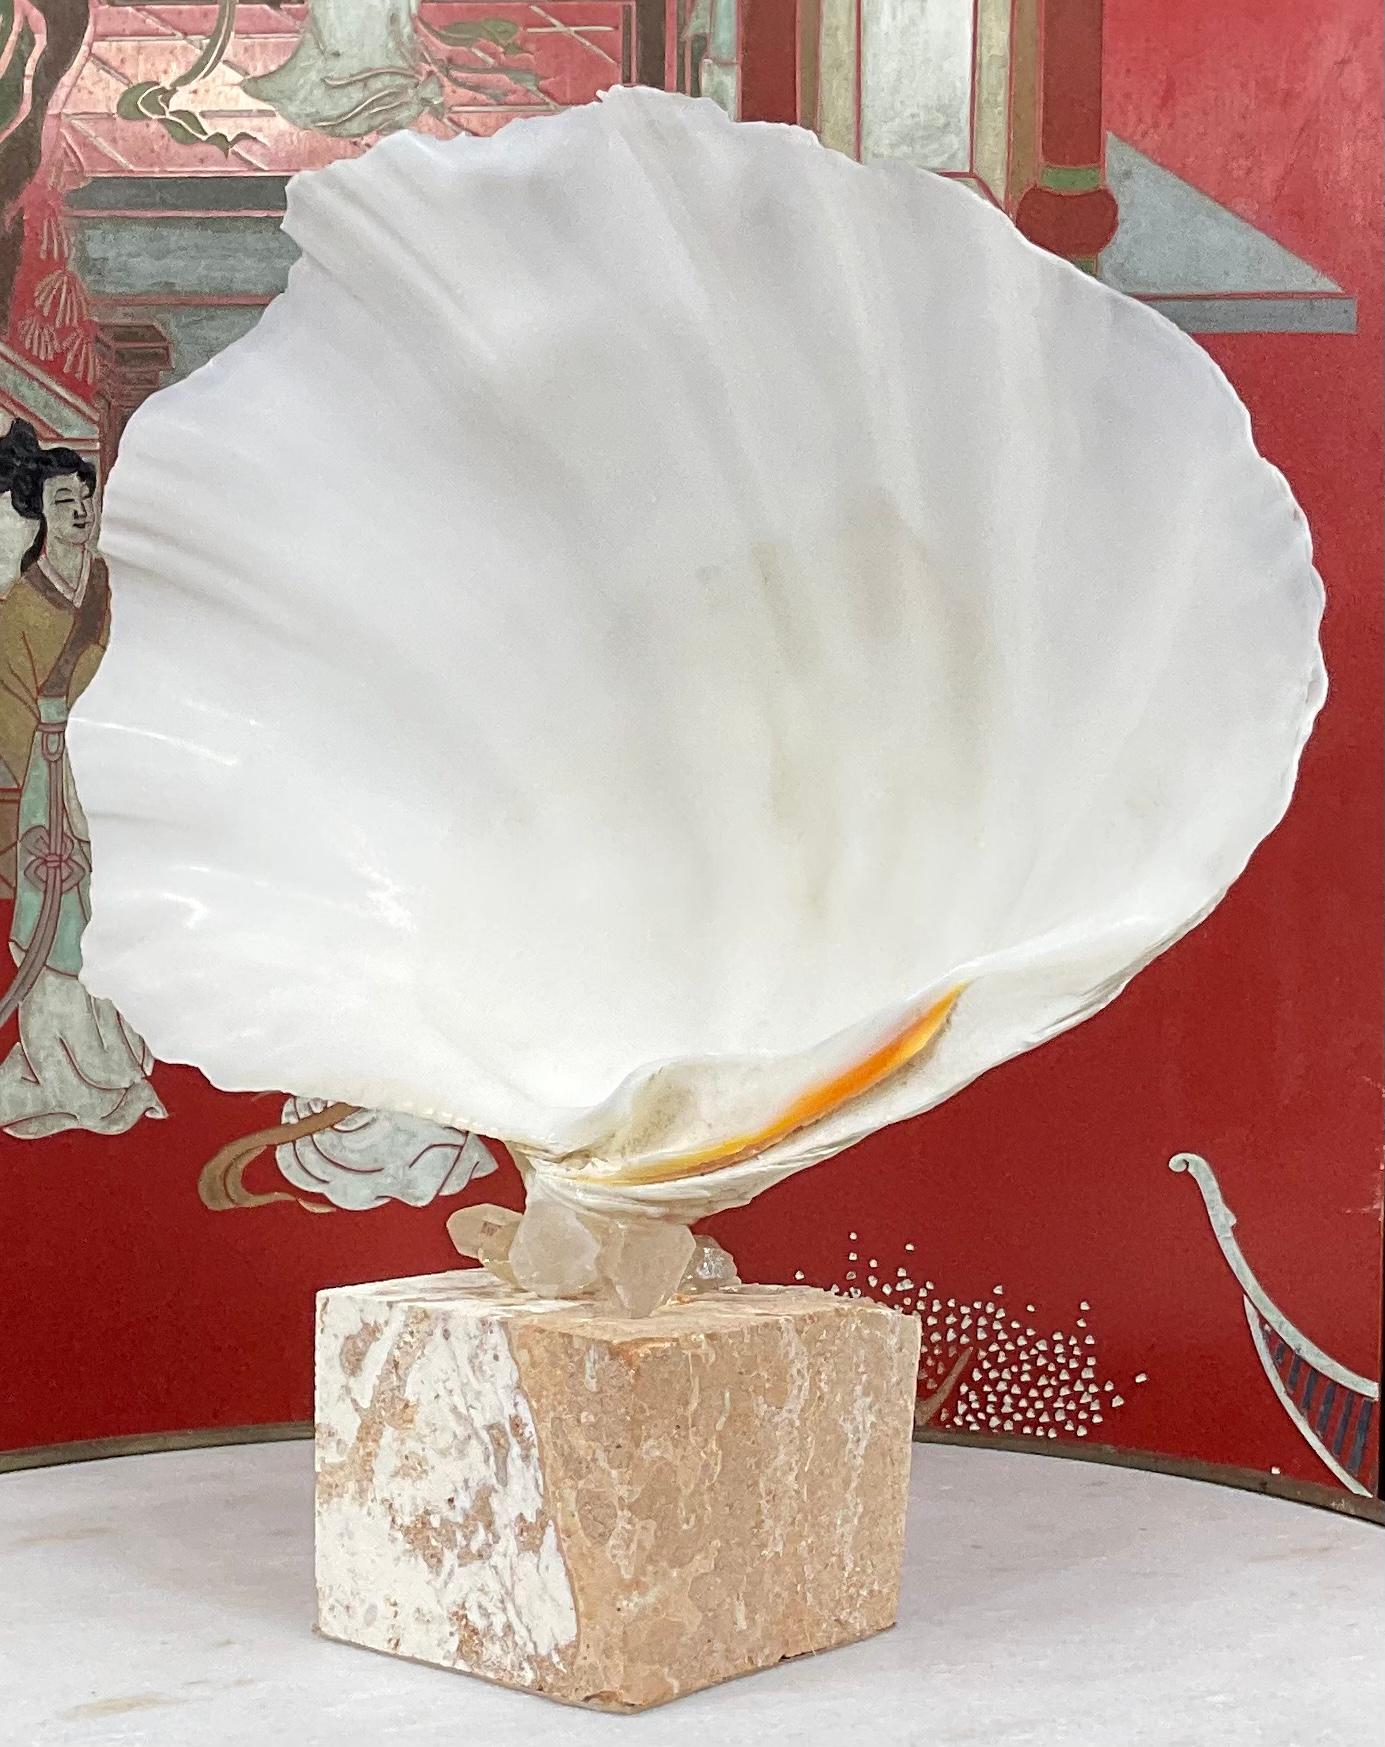 Beautiful natural clamshell with cream color patina, professionally clean and mounted on original natural coral base, with some accents of rock Crystal. Great natural object of art for display.
Size of clamshell without base is 12” x 8”.